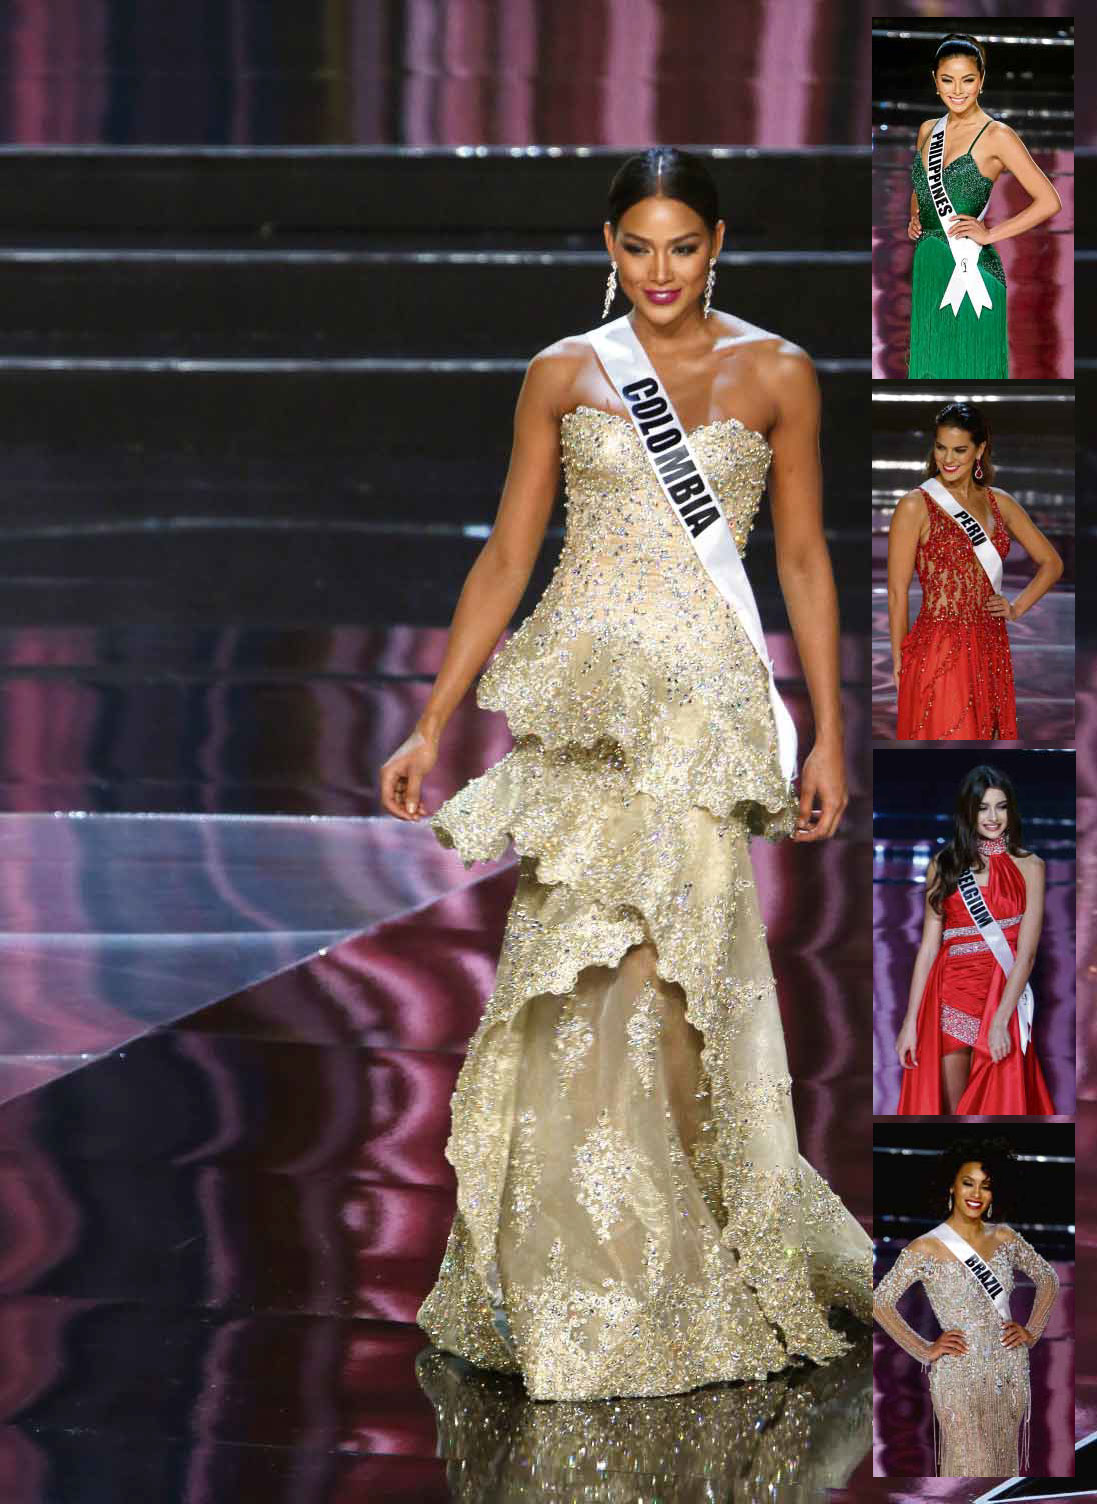 TOP FAVORITE Miss Colombia Andrea Tovar emerges as the top favorite to win the Miss Universe 2016 crown in betting stations worldwide. Expected to offer stiff competition are the Philippines’ Maxine Medina (topmost), Peru’s Valeria Piazza, Belgium’s Stephanie Geldhof and Brazil’s Raissa Santana. PHOTOS BY EDWIN BACASMAS